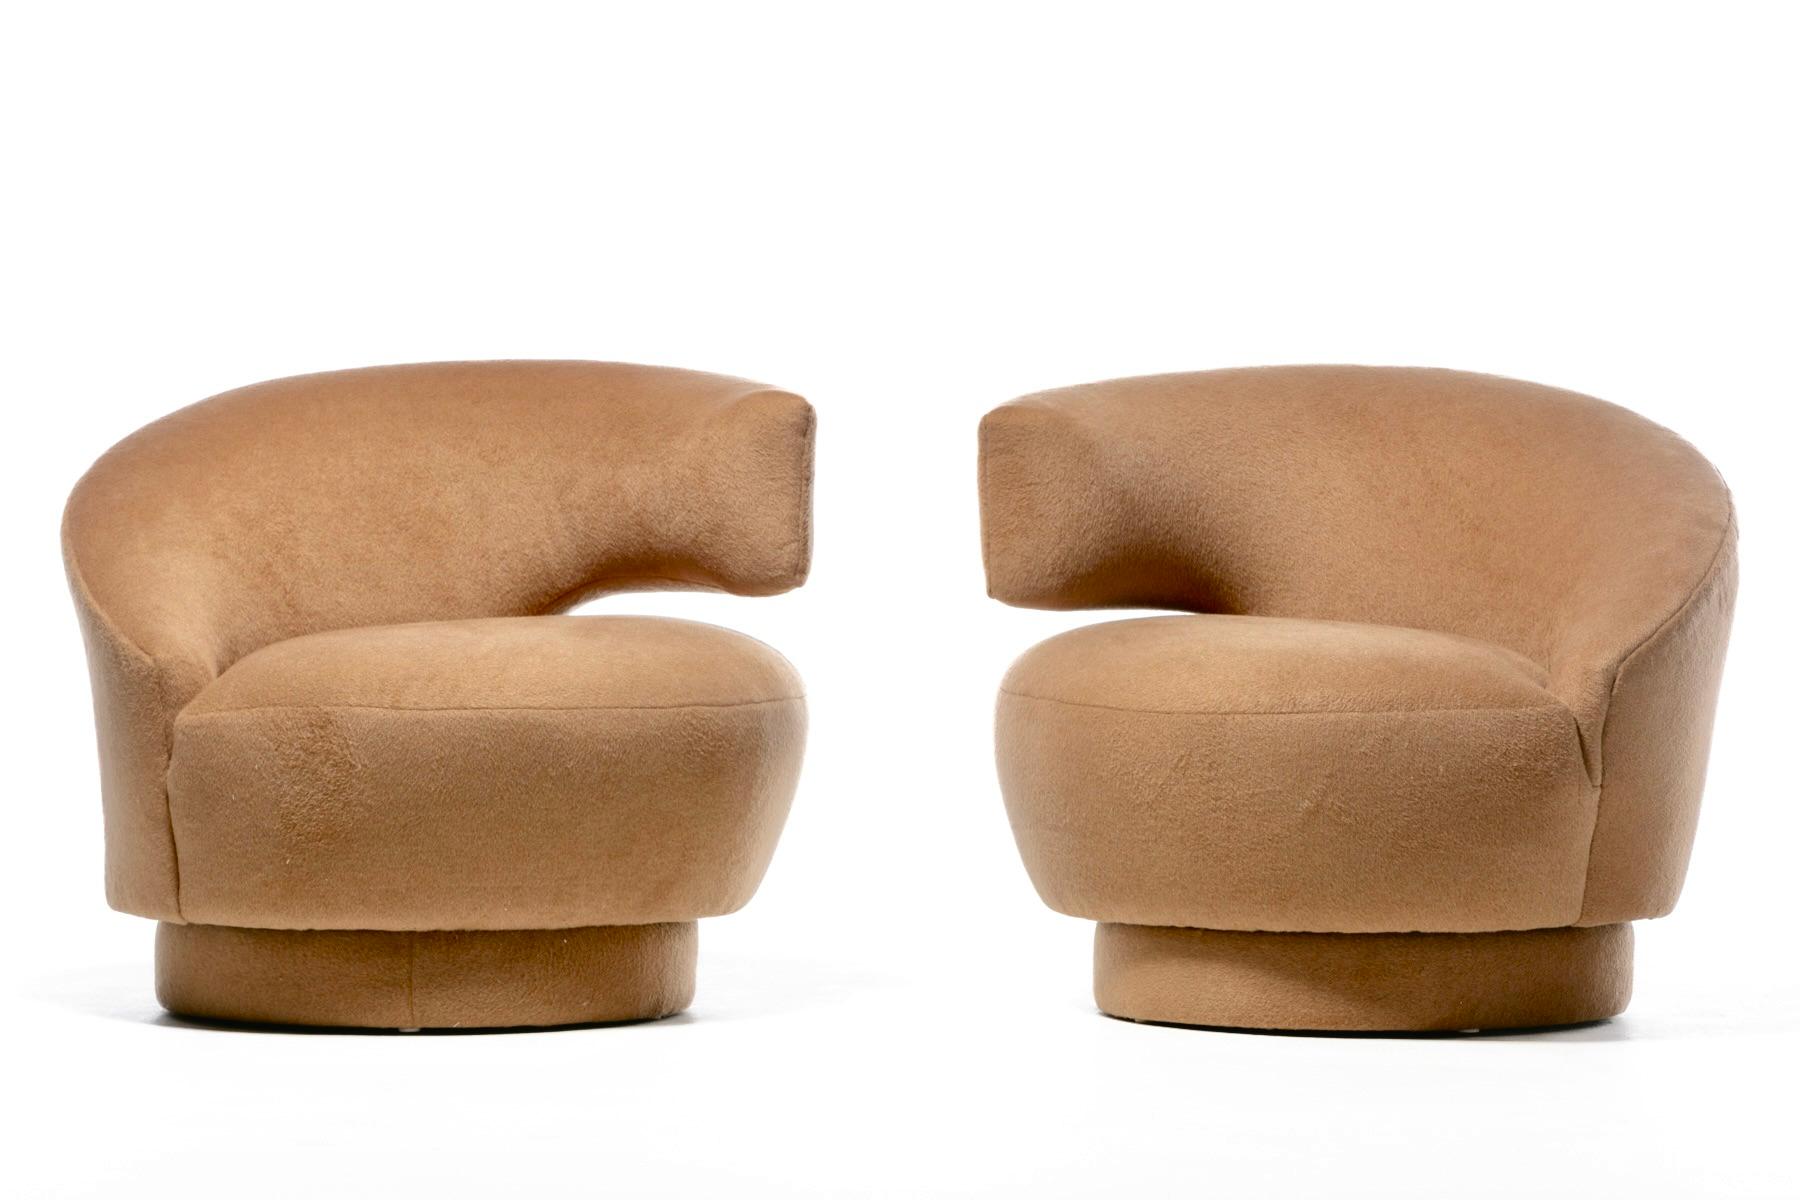 Vladimir Kagan Caterpillar Chairs Newly Upholstered in Camel Color Mohair For Sale 3